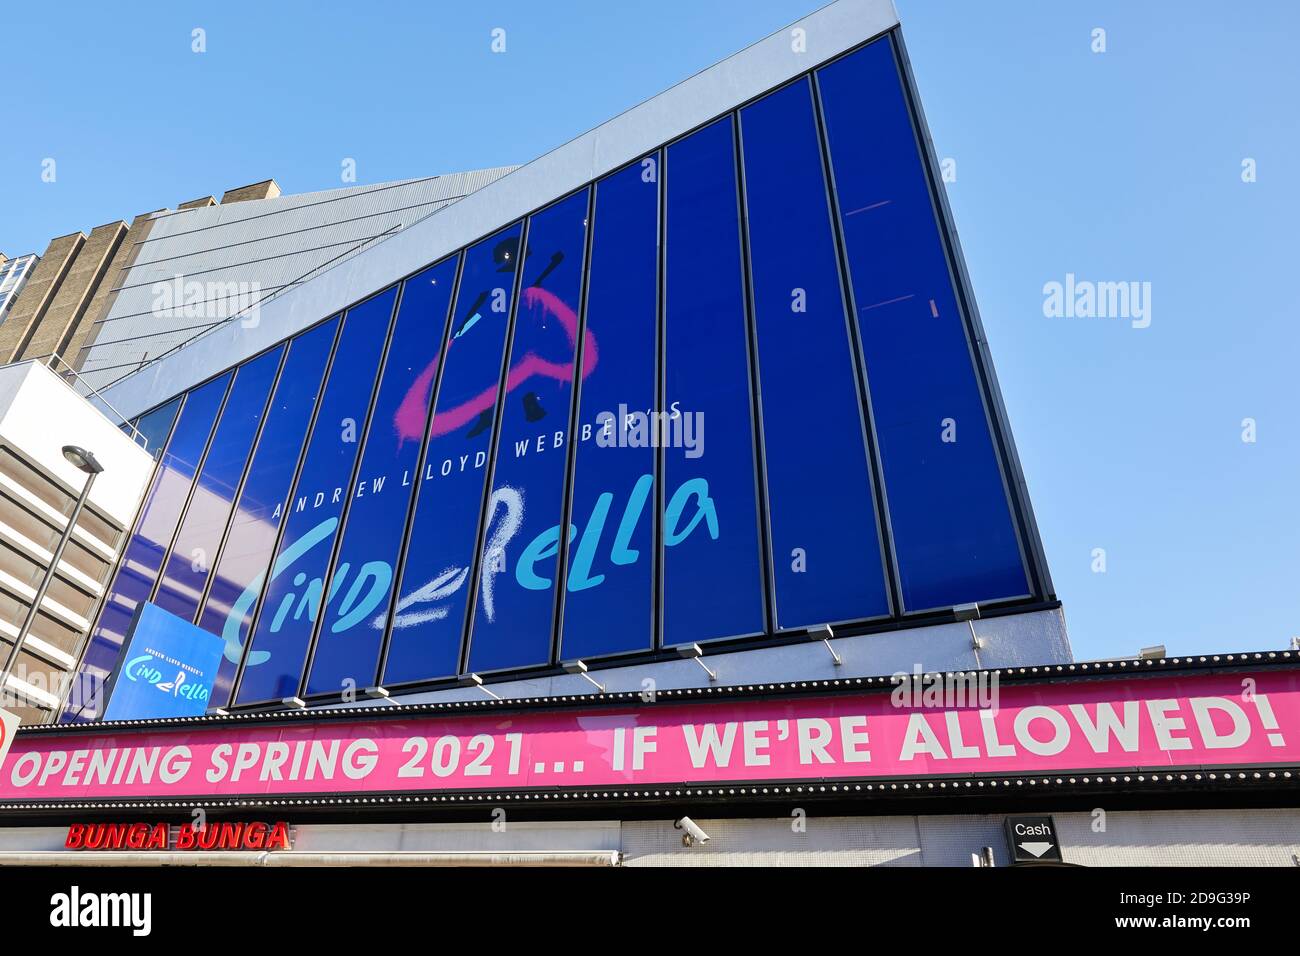 London, UK. - 4 Nov 2020: The exterior of the Gillian Lynne Theatre in Covent Garden advertising Andrew Lloyd Webber’s new musical Cinderella, whose premiere has been delayed until Spring 2021. Stock Photo